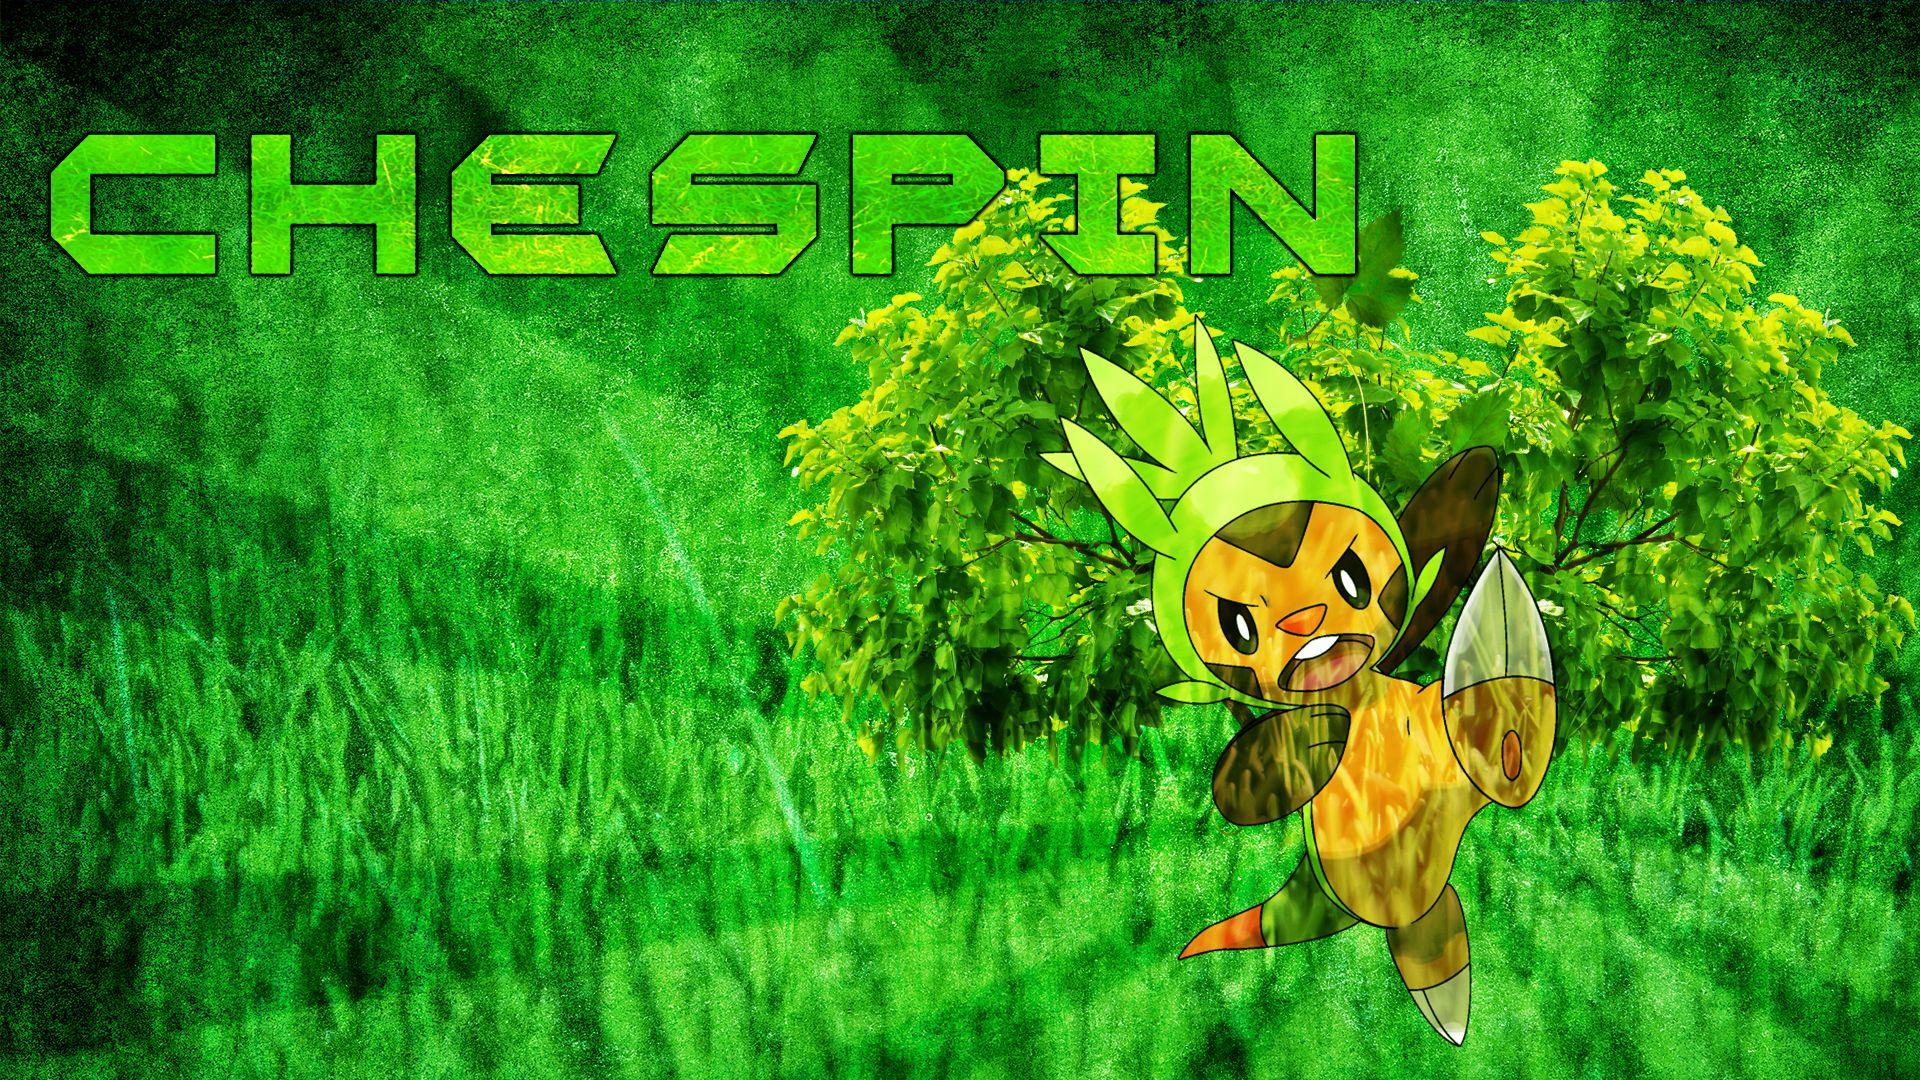 Chespin Wallpapers by MediaCriggz